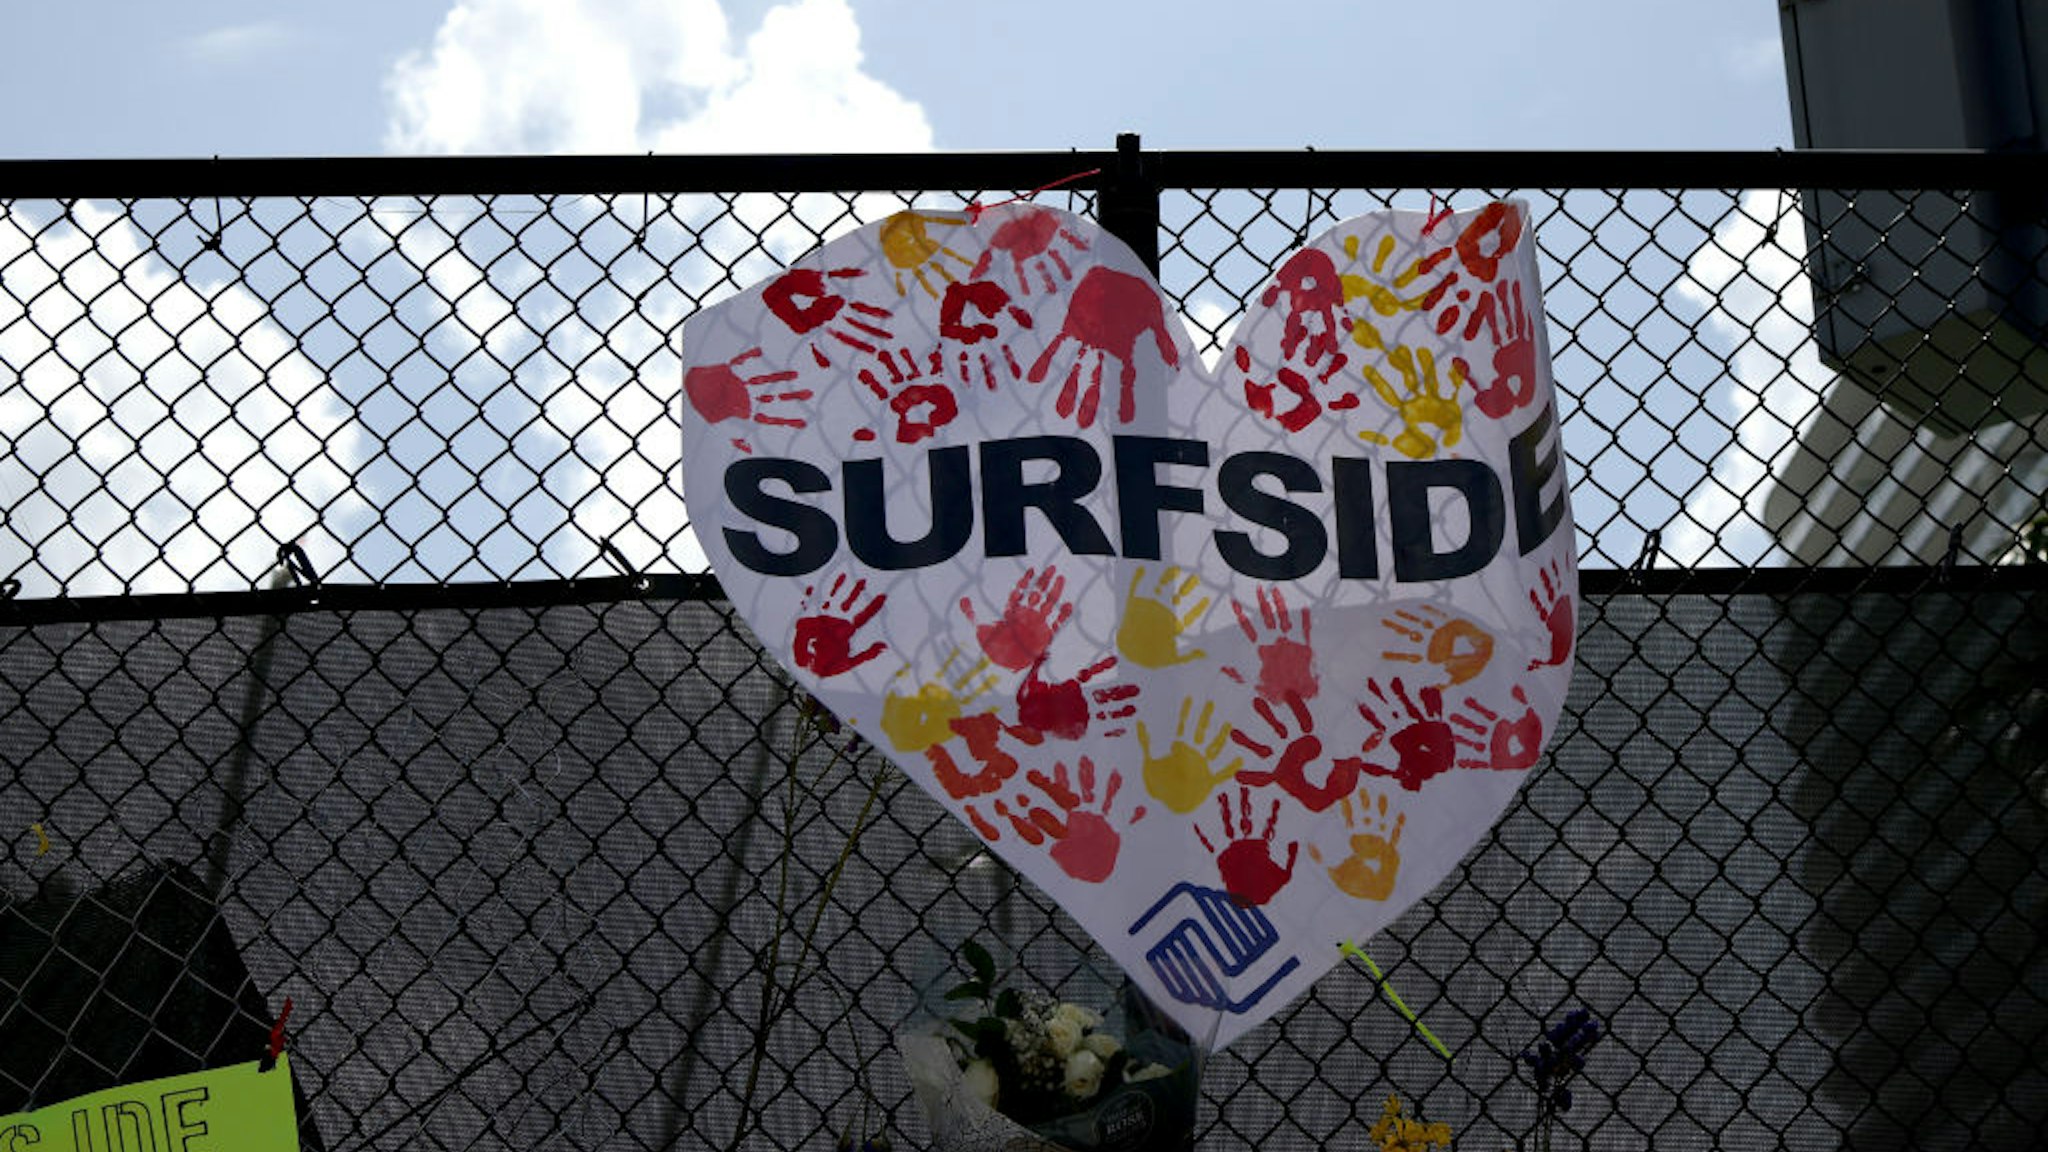 URFSIDE, FLORIDA - JULY 08: Signs are placed near the memorial site for victims of the collapsed 12-story Champlain Towers South condo building on July 08, 2021 in Surfside, Florida. With the death toll currently at 60 and 80 people still missing, rescue workers have shifted the operation to recovery efforts. (Photo by Anna Moneymaker/Getty Images)